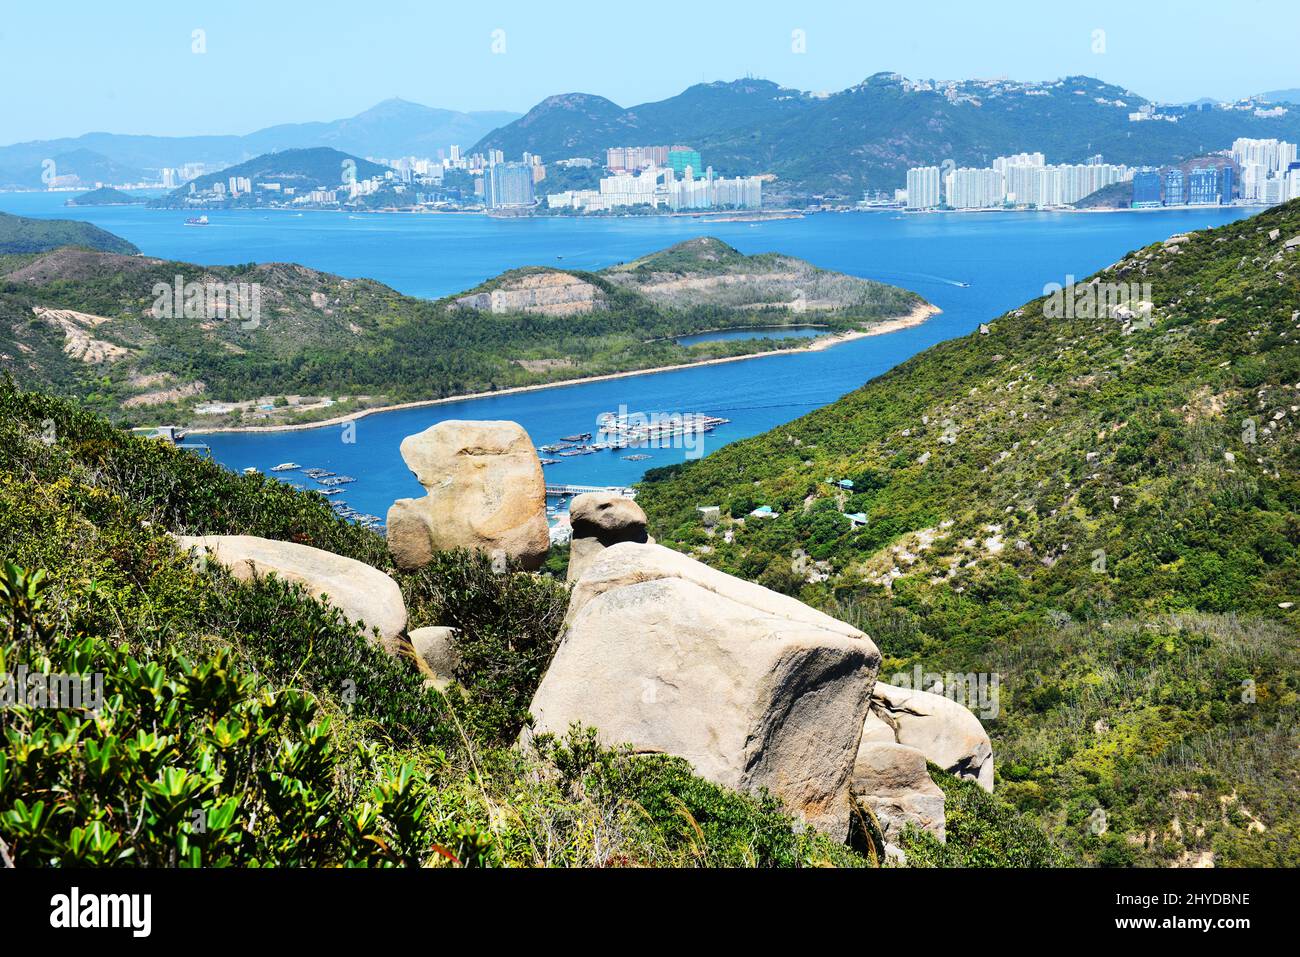 A view of Pichic Bay ( Sok Kwu Wan ), East Lamma Channel and Hong Kong Island ( South Side ) as seen from the top of Mount Stenhouse on Lamma Island. Stock Photo